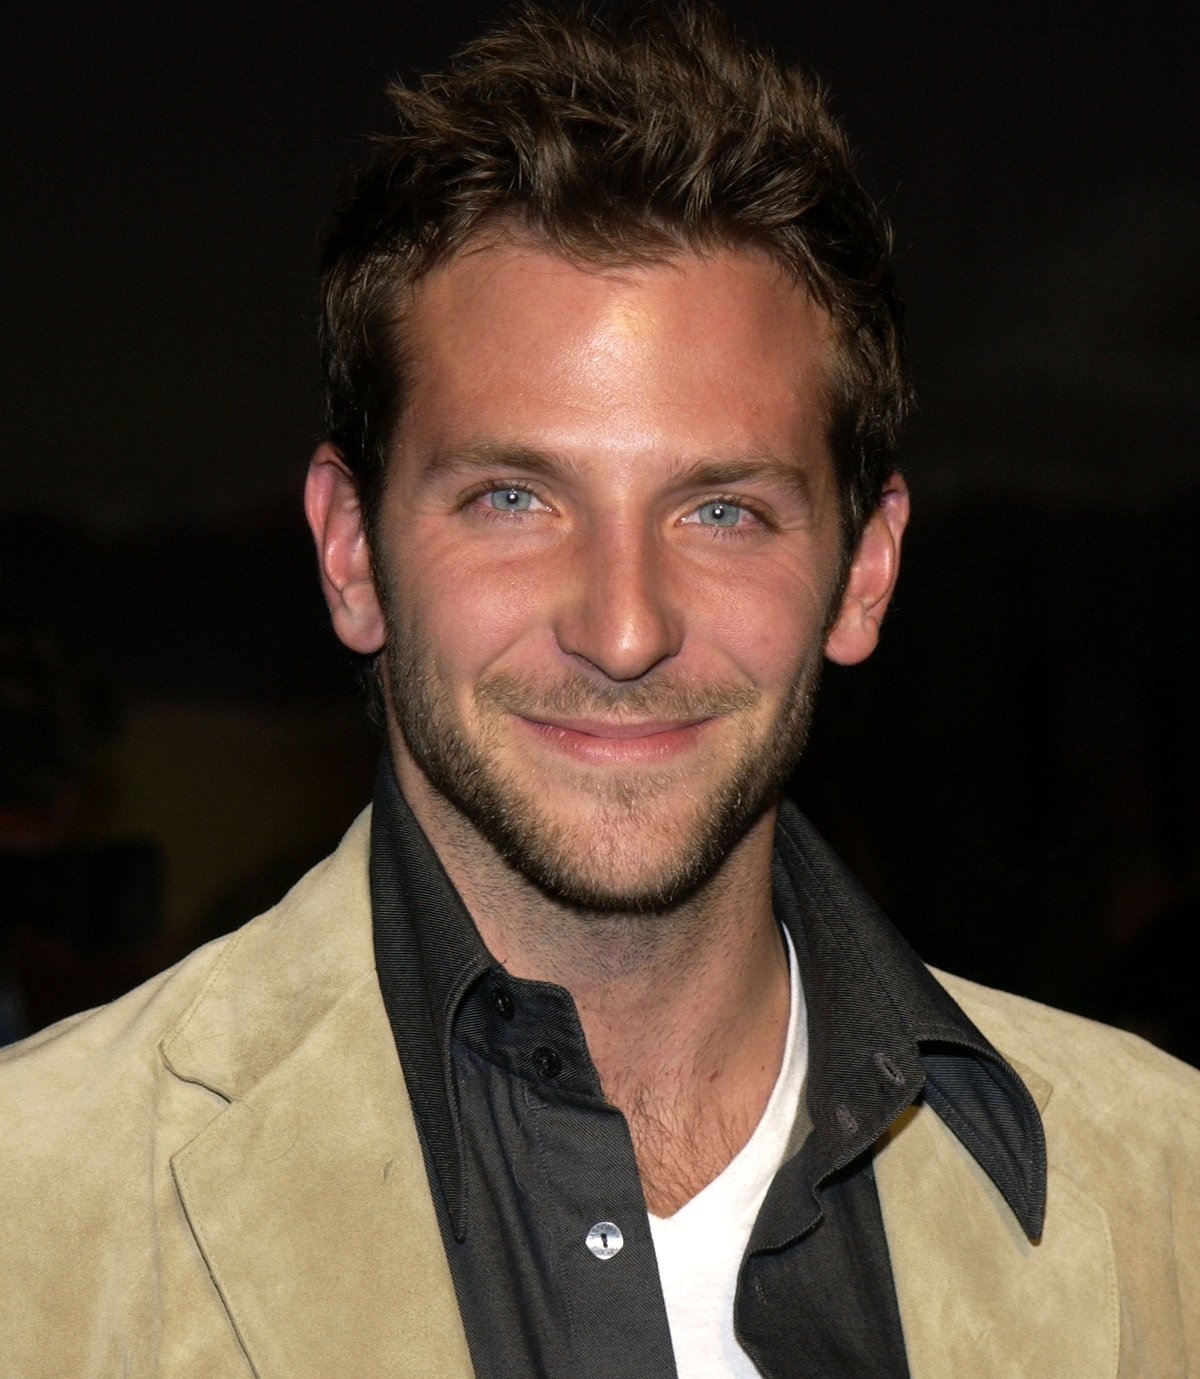 Bradley Cooper is seen at the 'Dreamkeeper' All-Star Winter Party. Bradley Cooper's first role was on 'Sex and the City'